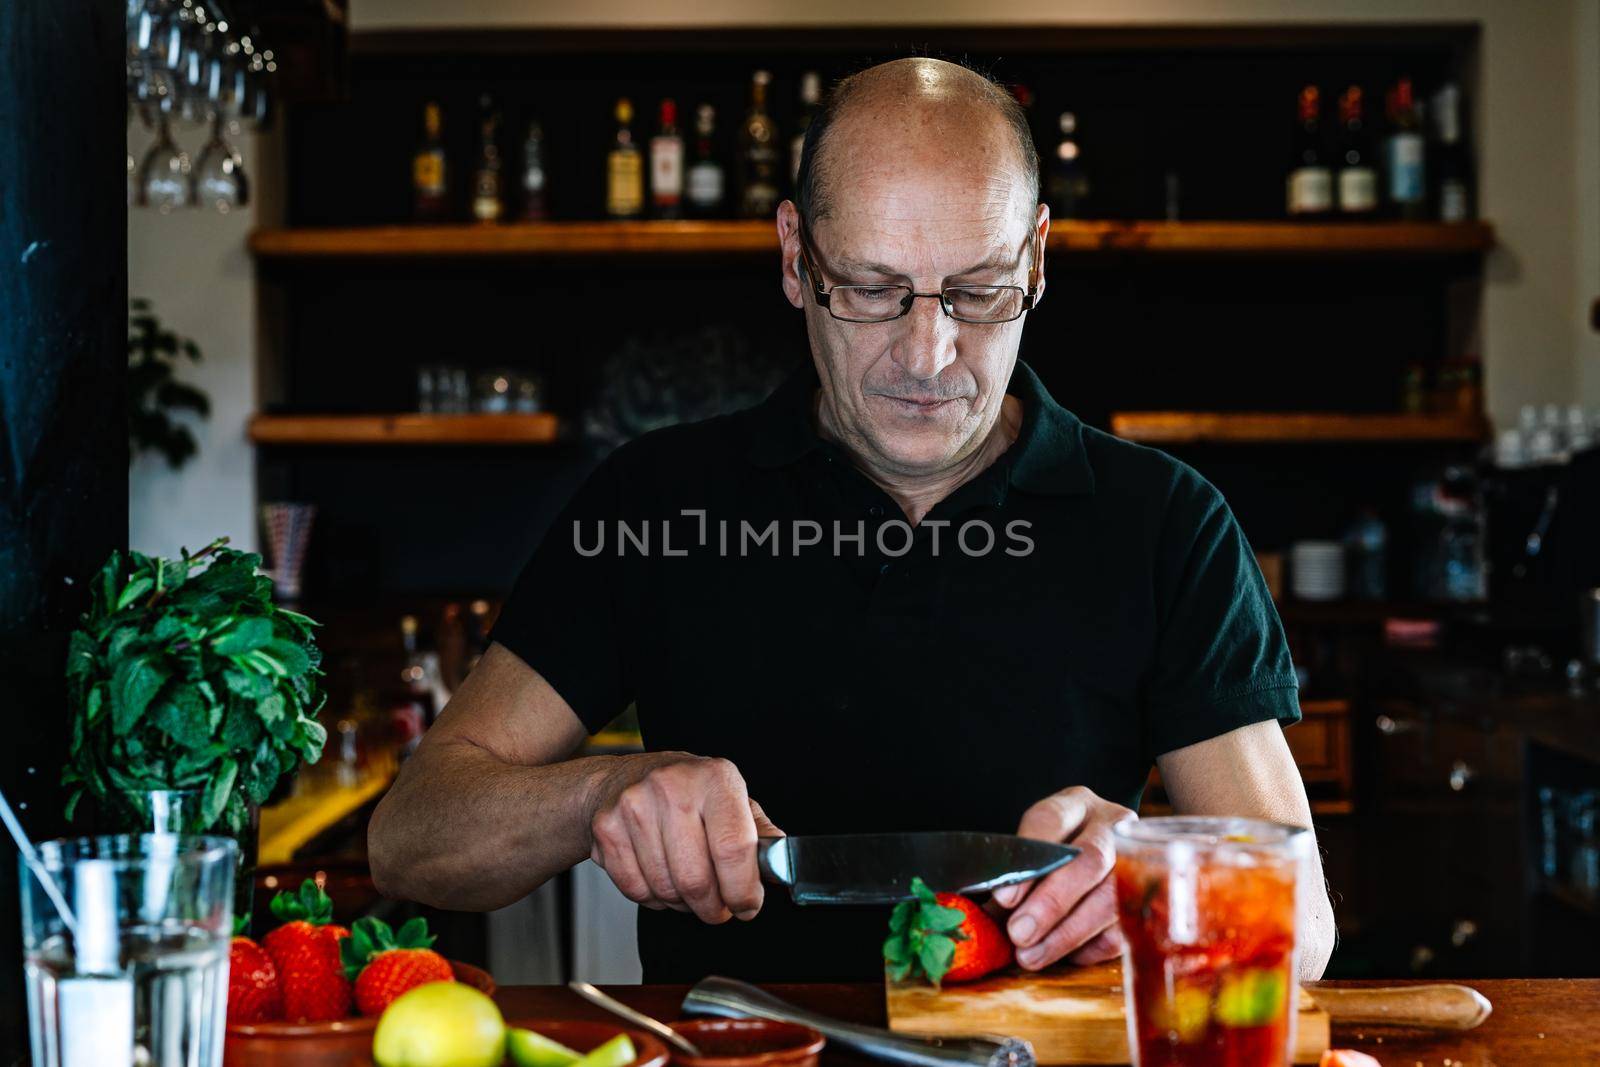 bald adult male, experienced, concentrated and hard-working waiter, dressed in company uniform, black polo shirt, cutting strawberries for a cocktail at the nightclub counter. Preparing cocktails for the customers. Warm atmosphere and dim light. Horizontal